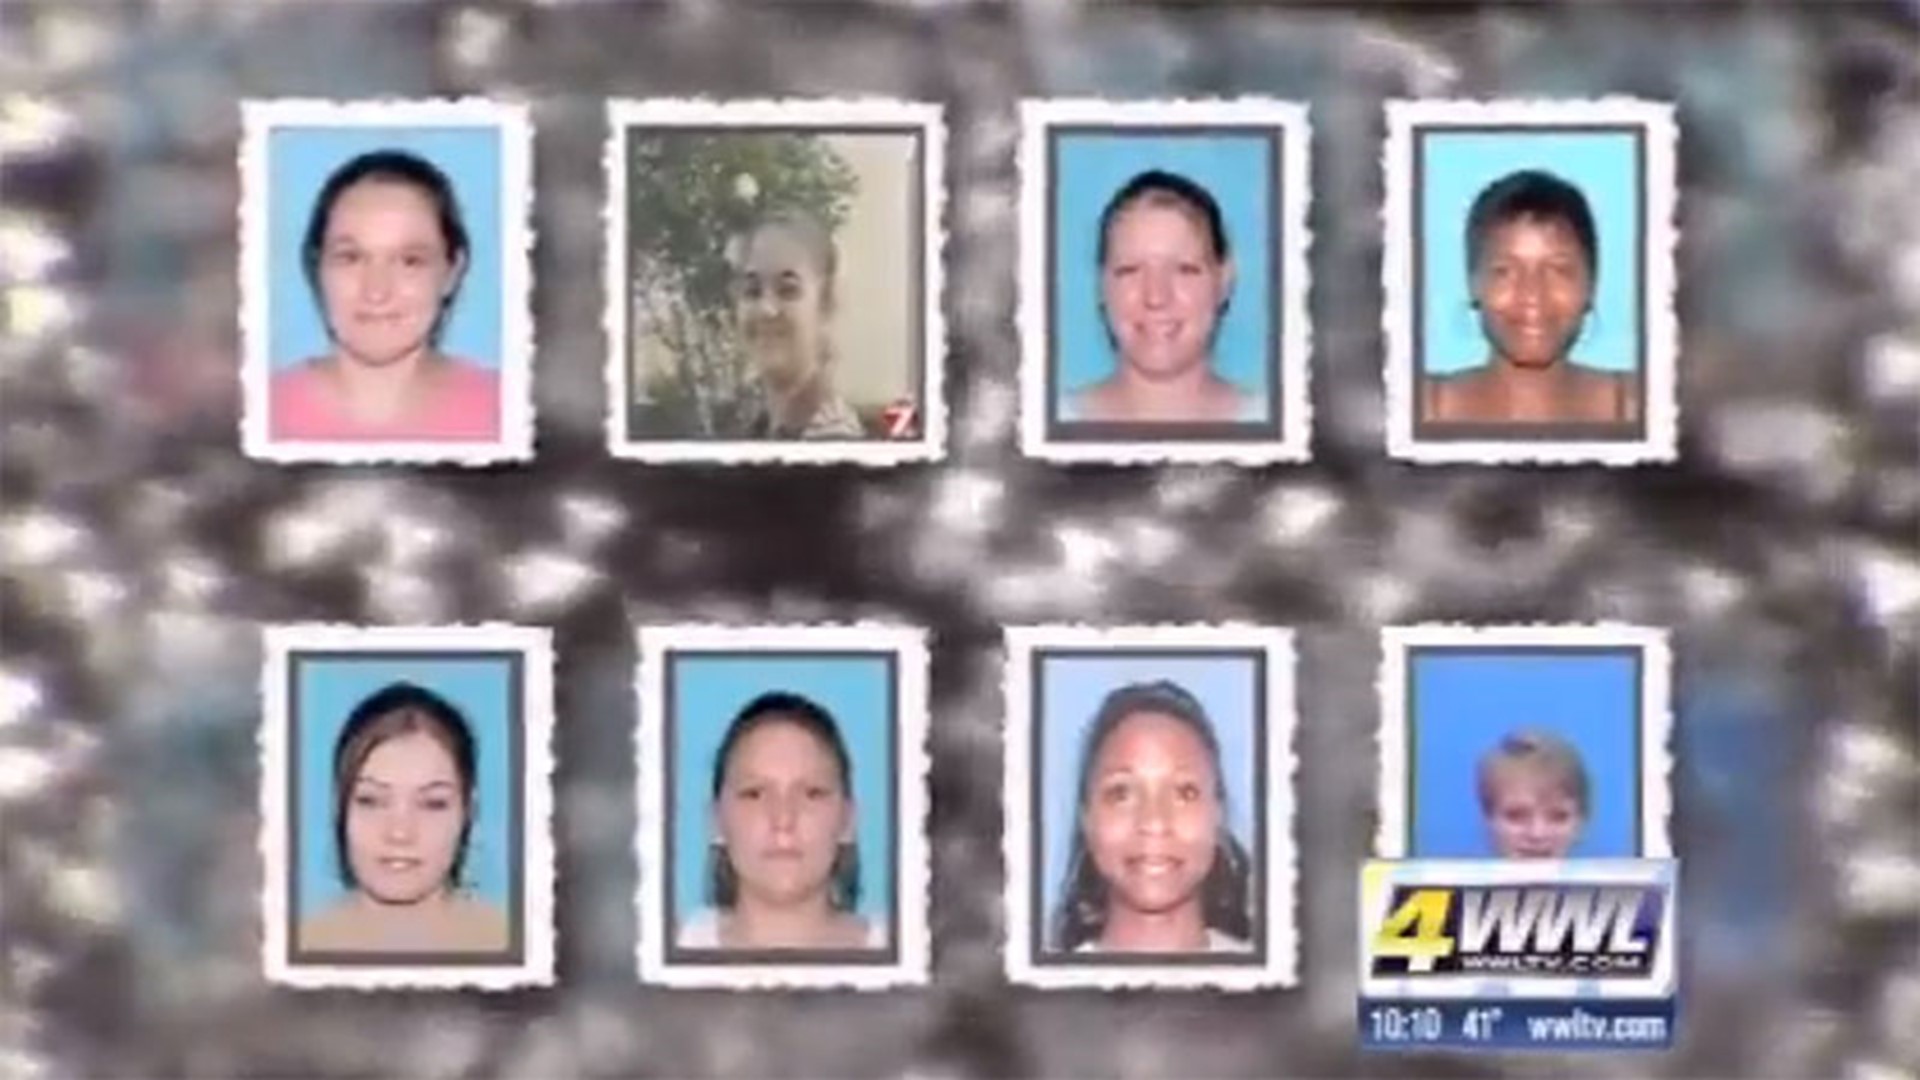 In south central Louisiana, in a small town on the edge of Cajun country, a string of eight young women were murdered between 2005 and 2009.